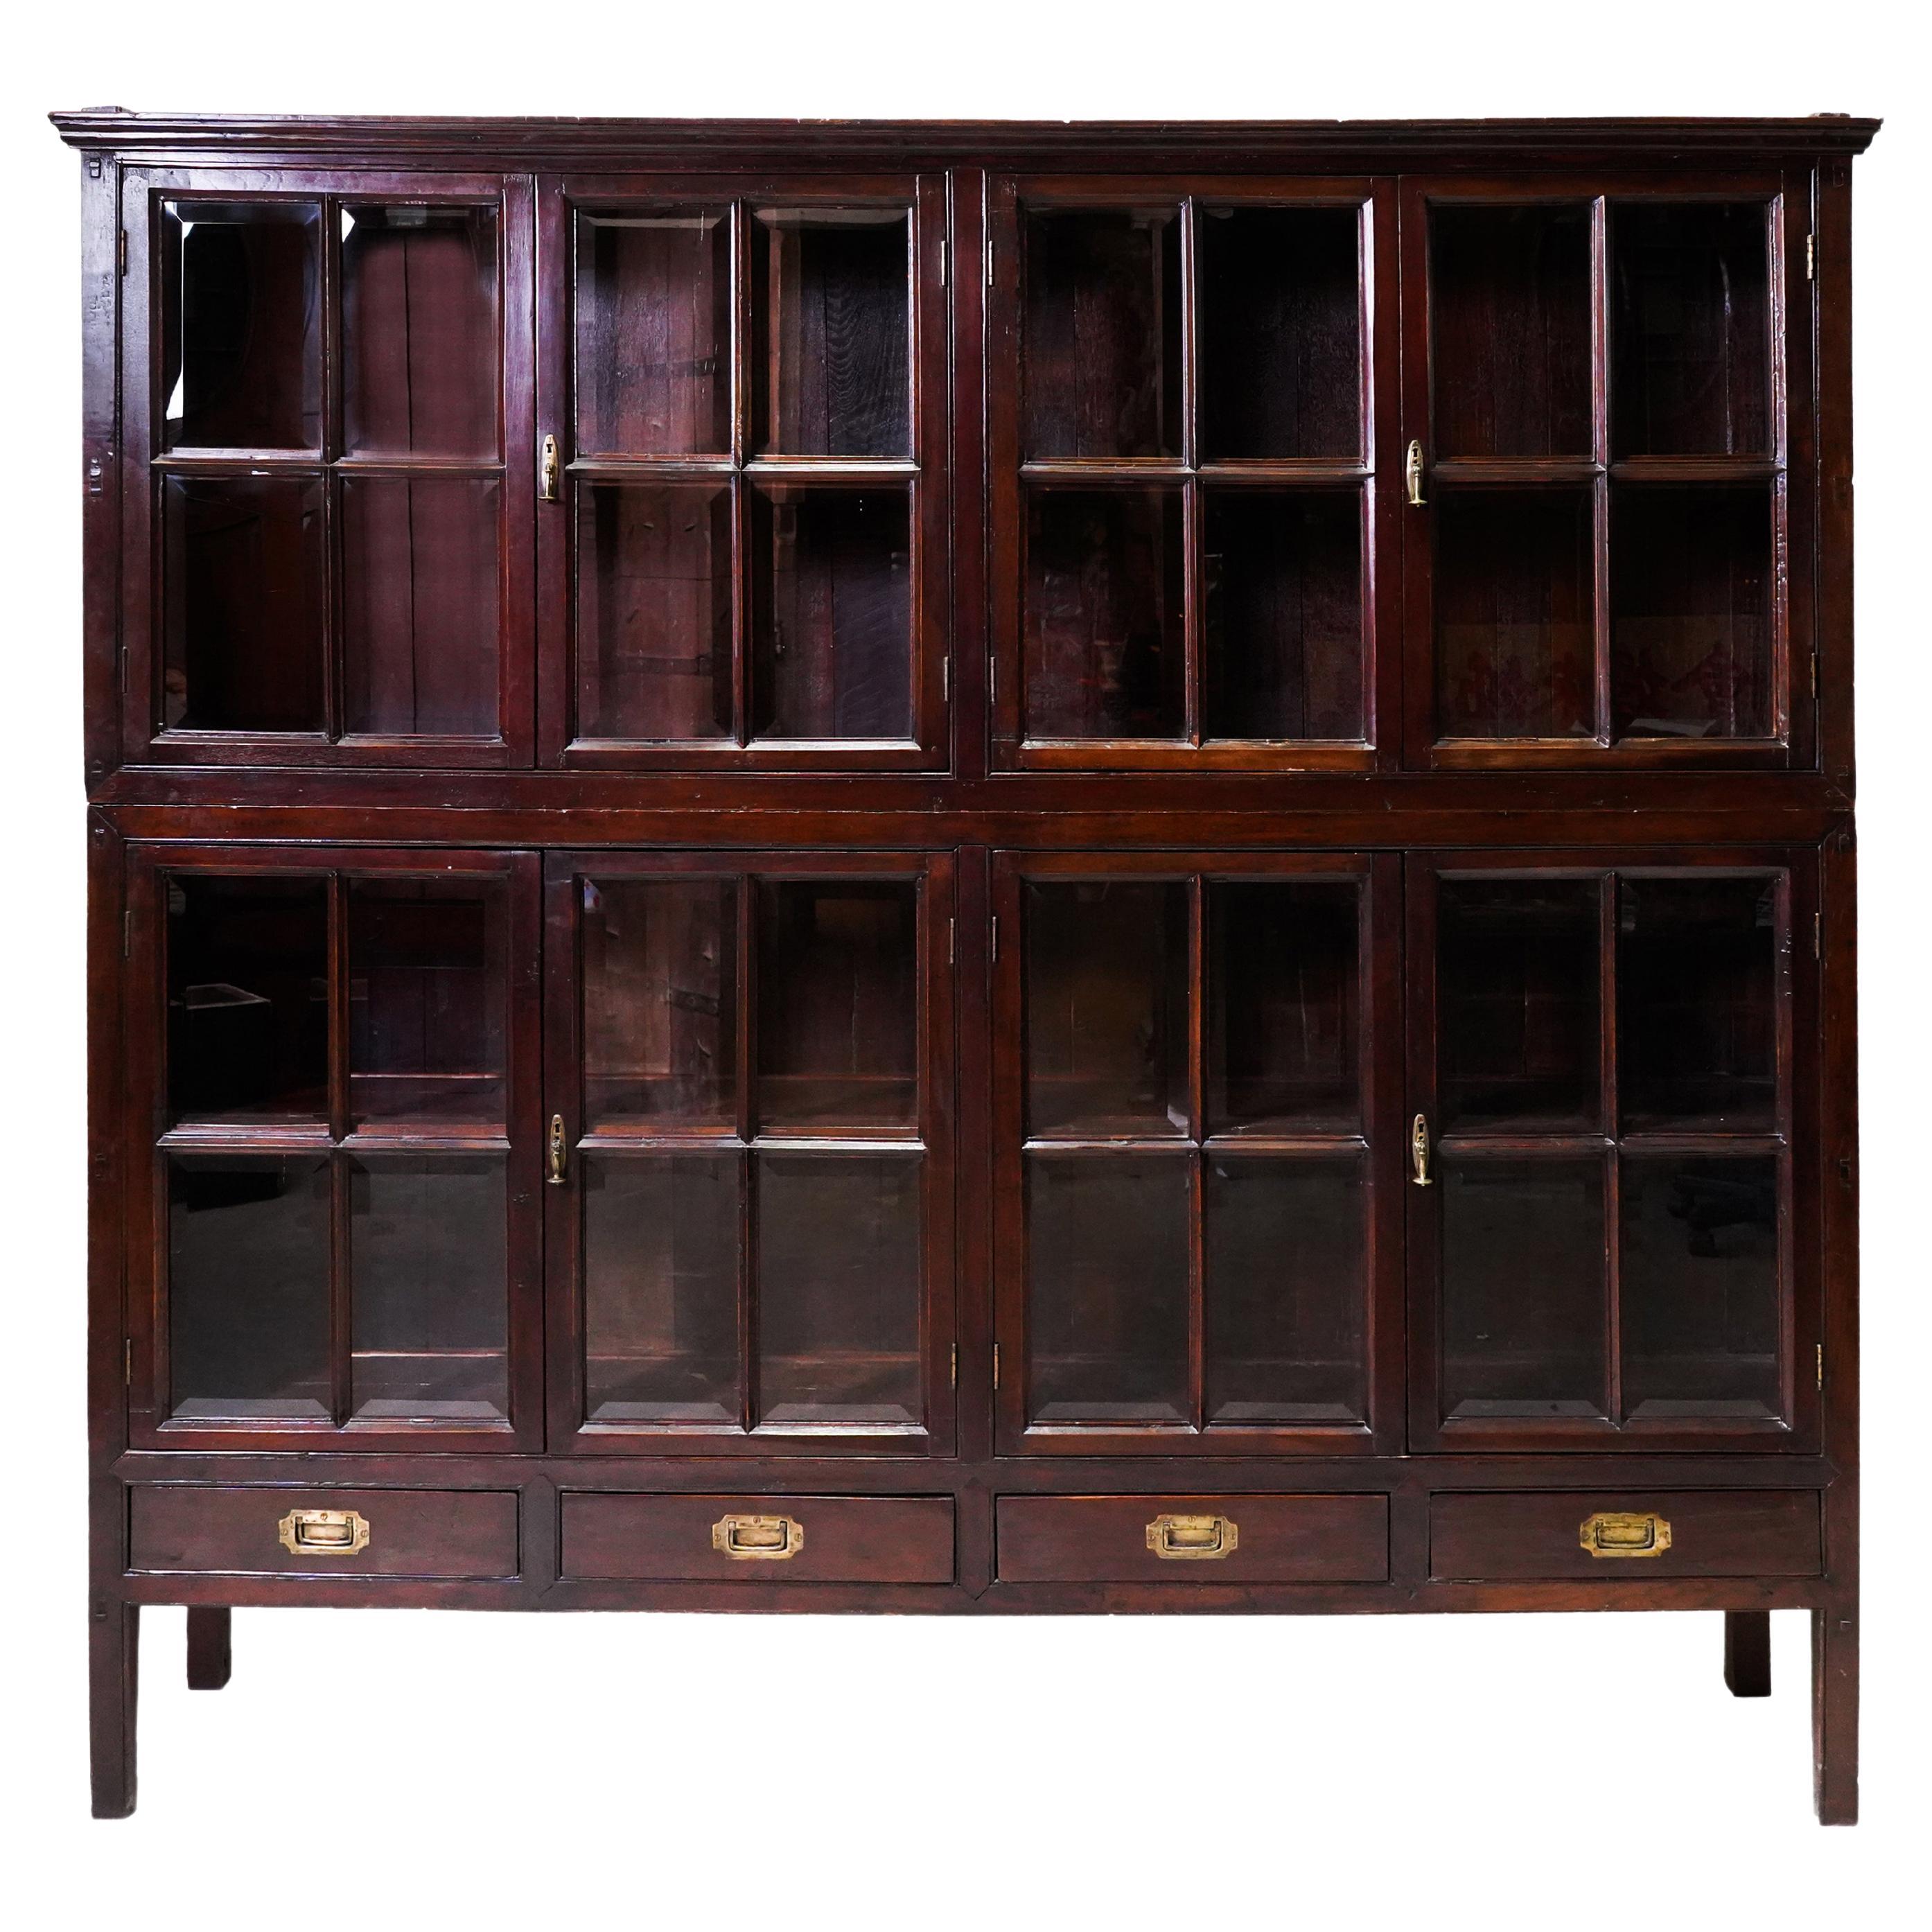 An Authentic British-Colonial Bookcase Made From Teakwood